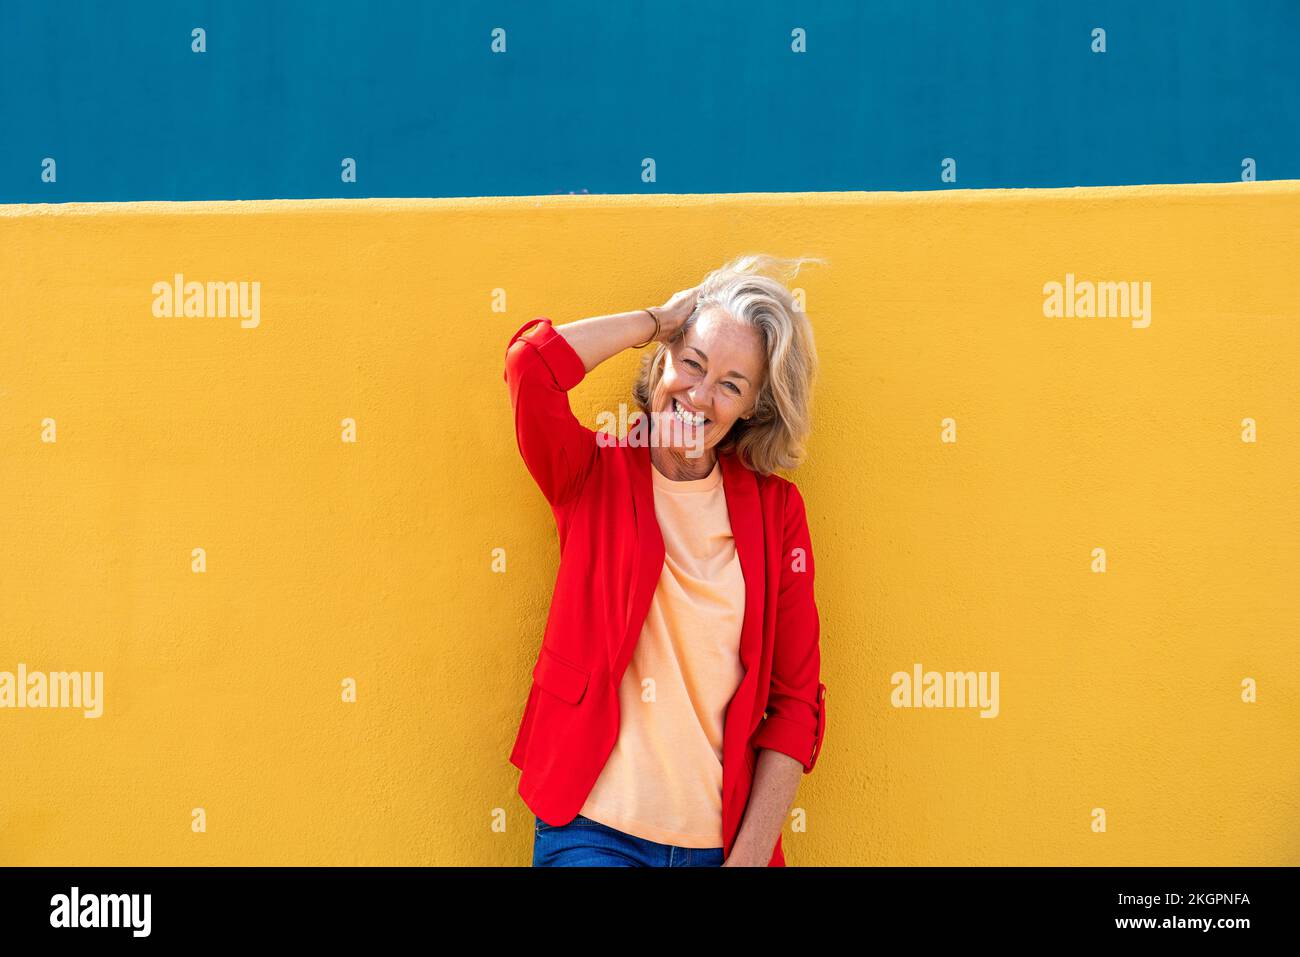 Happy woman with hand in hair wearing red blazer Stock Photo